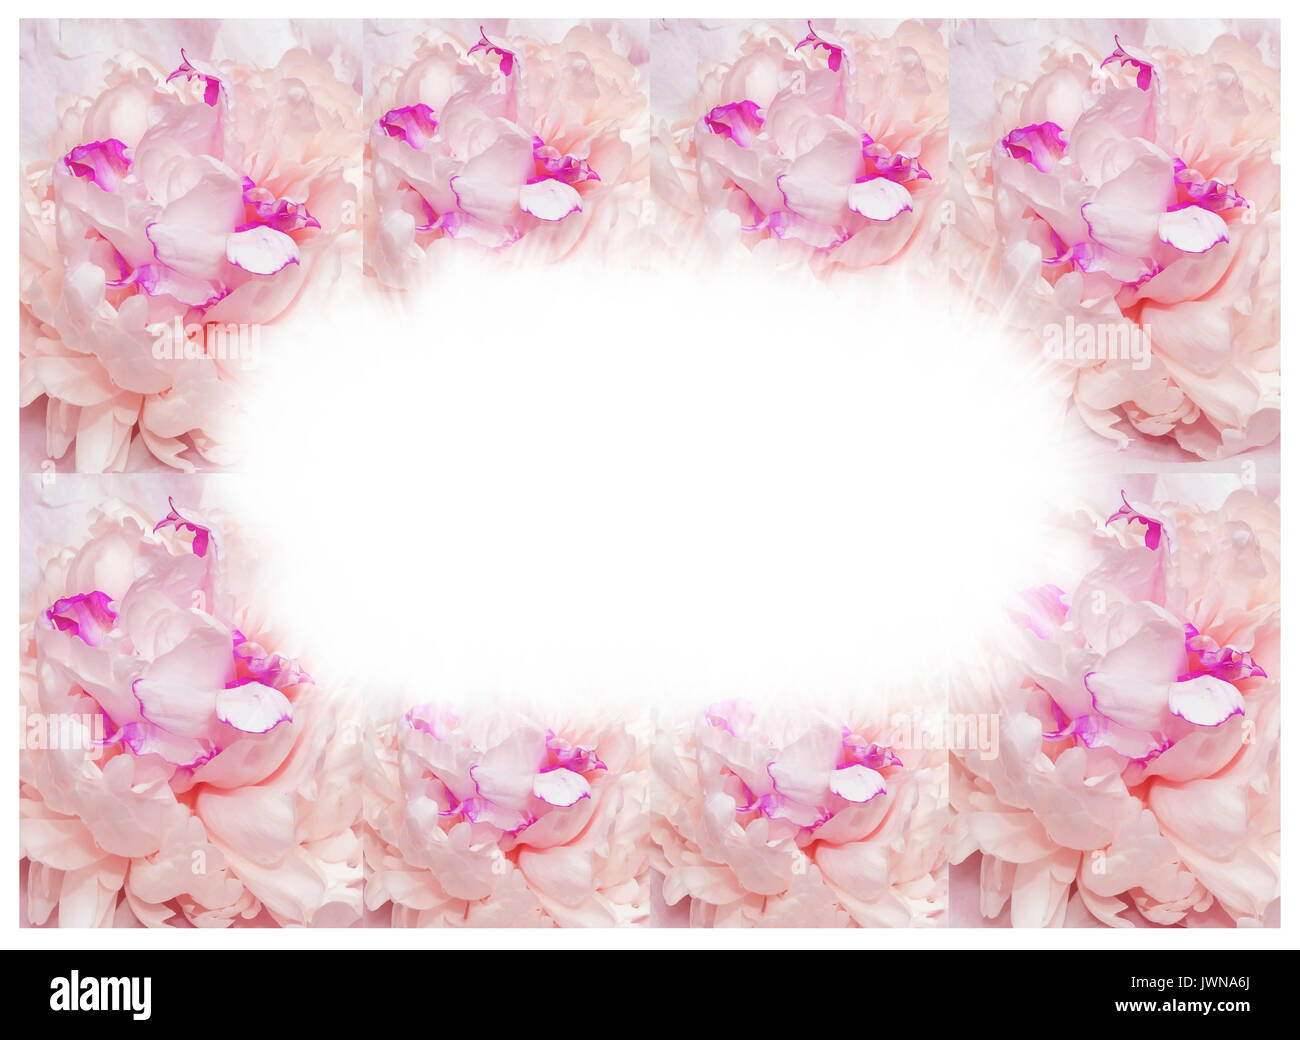 The fresh bright blooming peonies flowers Stock Photo